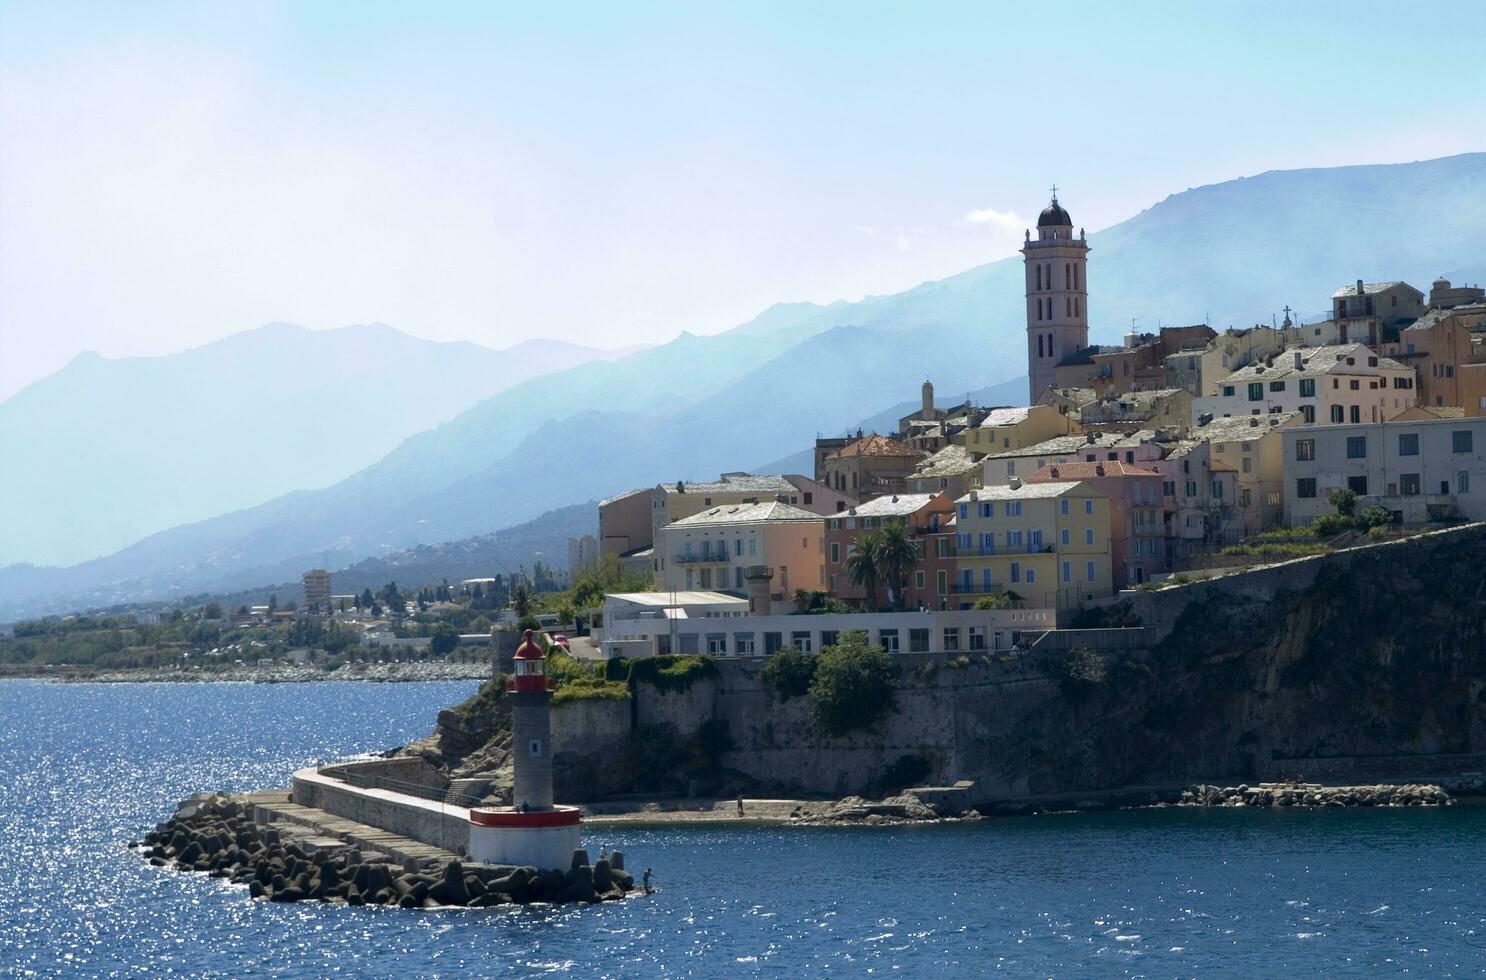 photographic view of the city of Bastia france photo